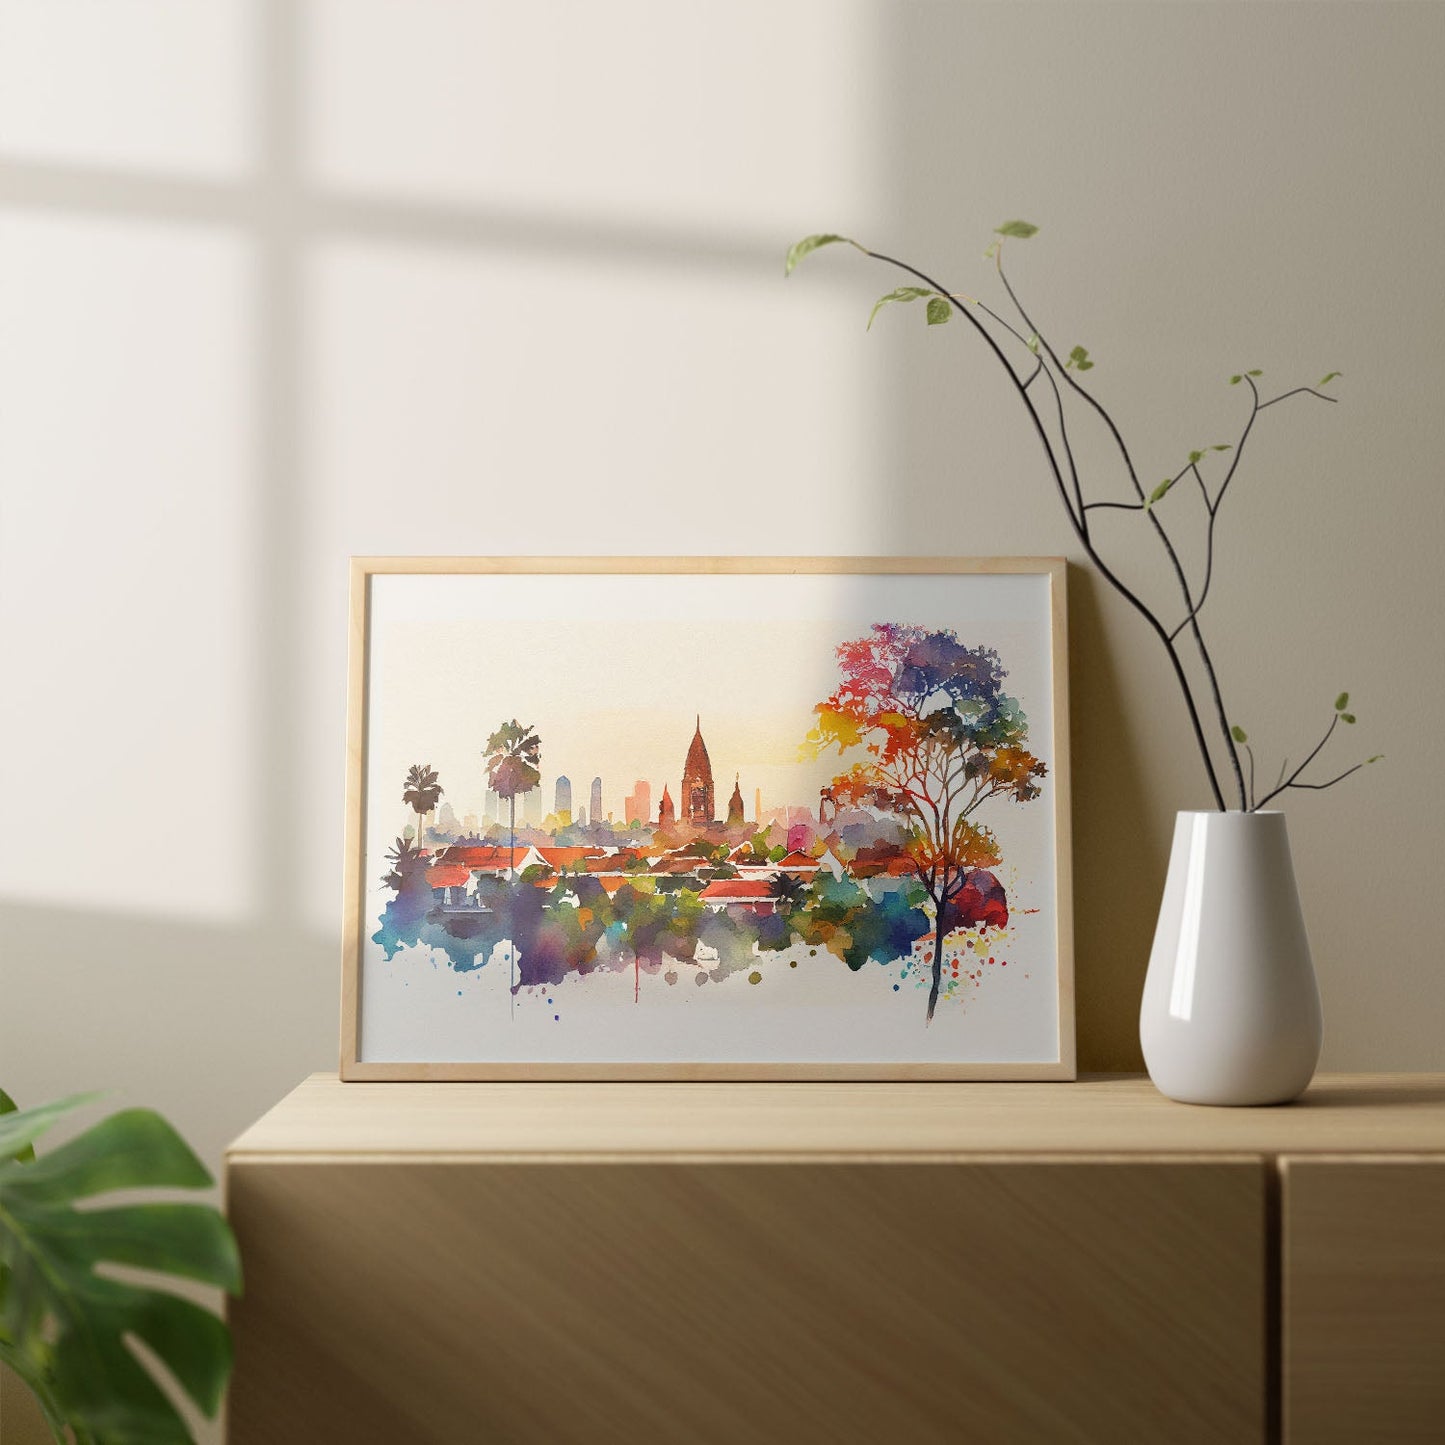 Nacnic watercolor of a skyline of the city of Bali_1. Aesthetic Wall Art Prints for Bedroom or Living Room Design.